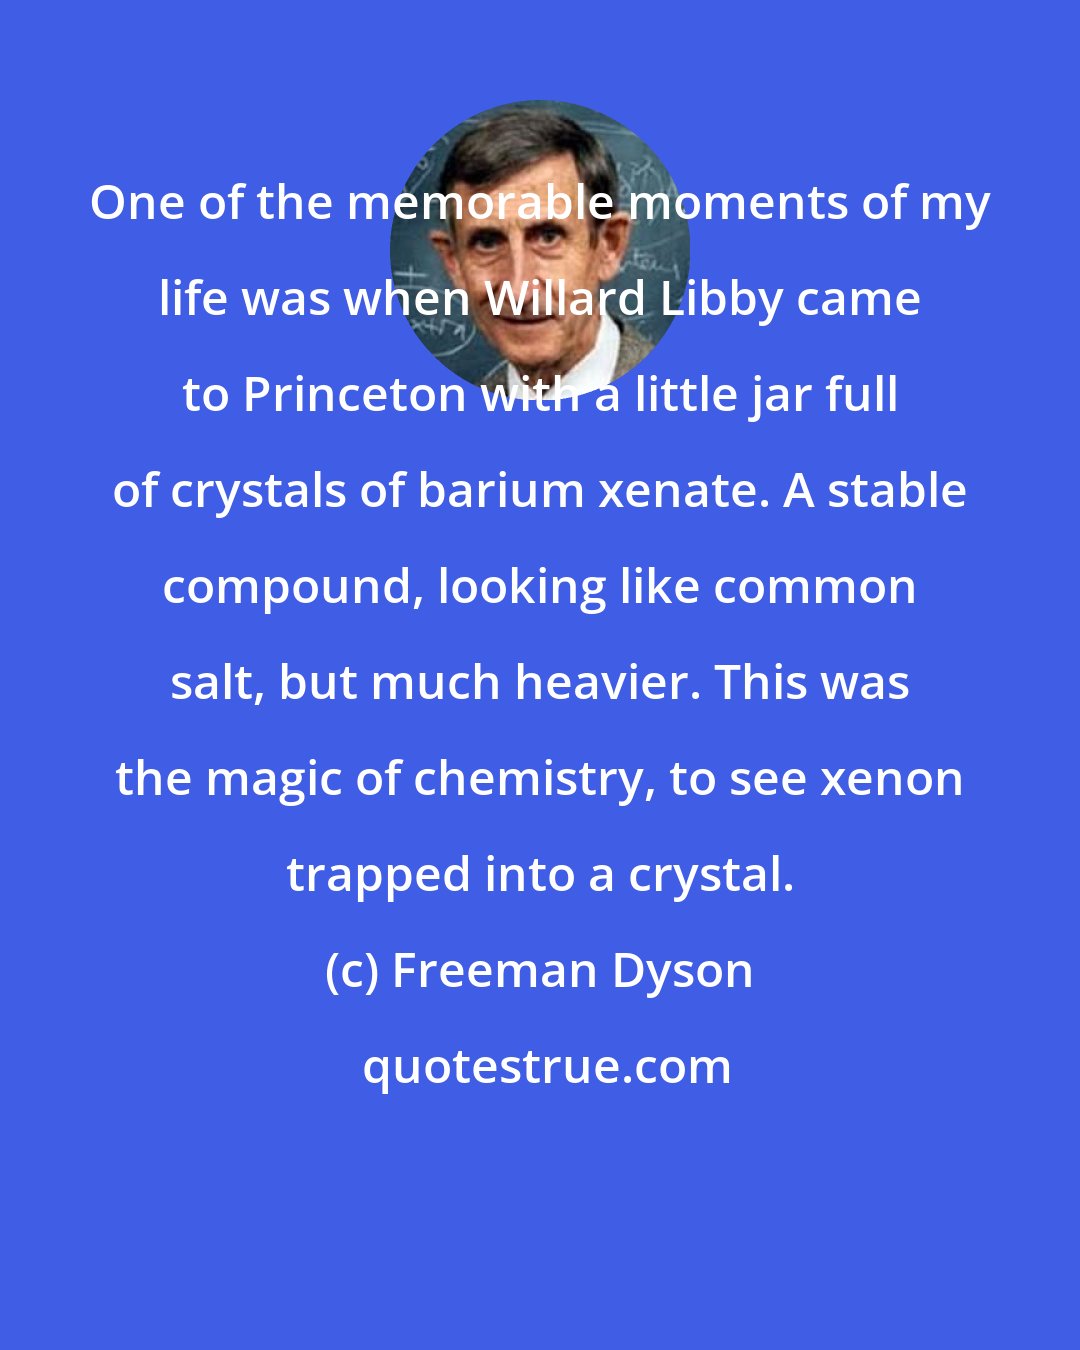 Freeman Dyson: One of the memorable moments of my life was when Willard Libby came to Princeton with a little jar full of crystals of barium xenate. A stable compound, looking like common salt, but much heavier. This was the magic of chemistry, to see xenon trapped into a crystal.